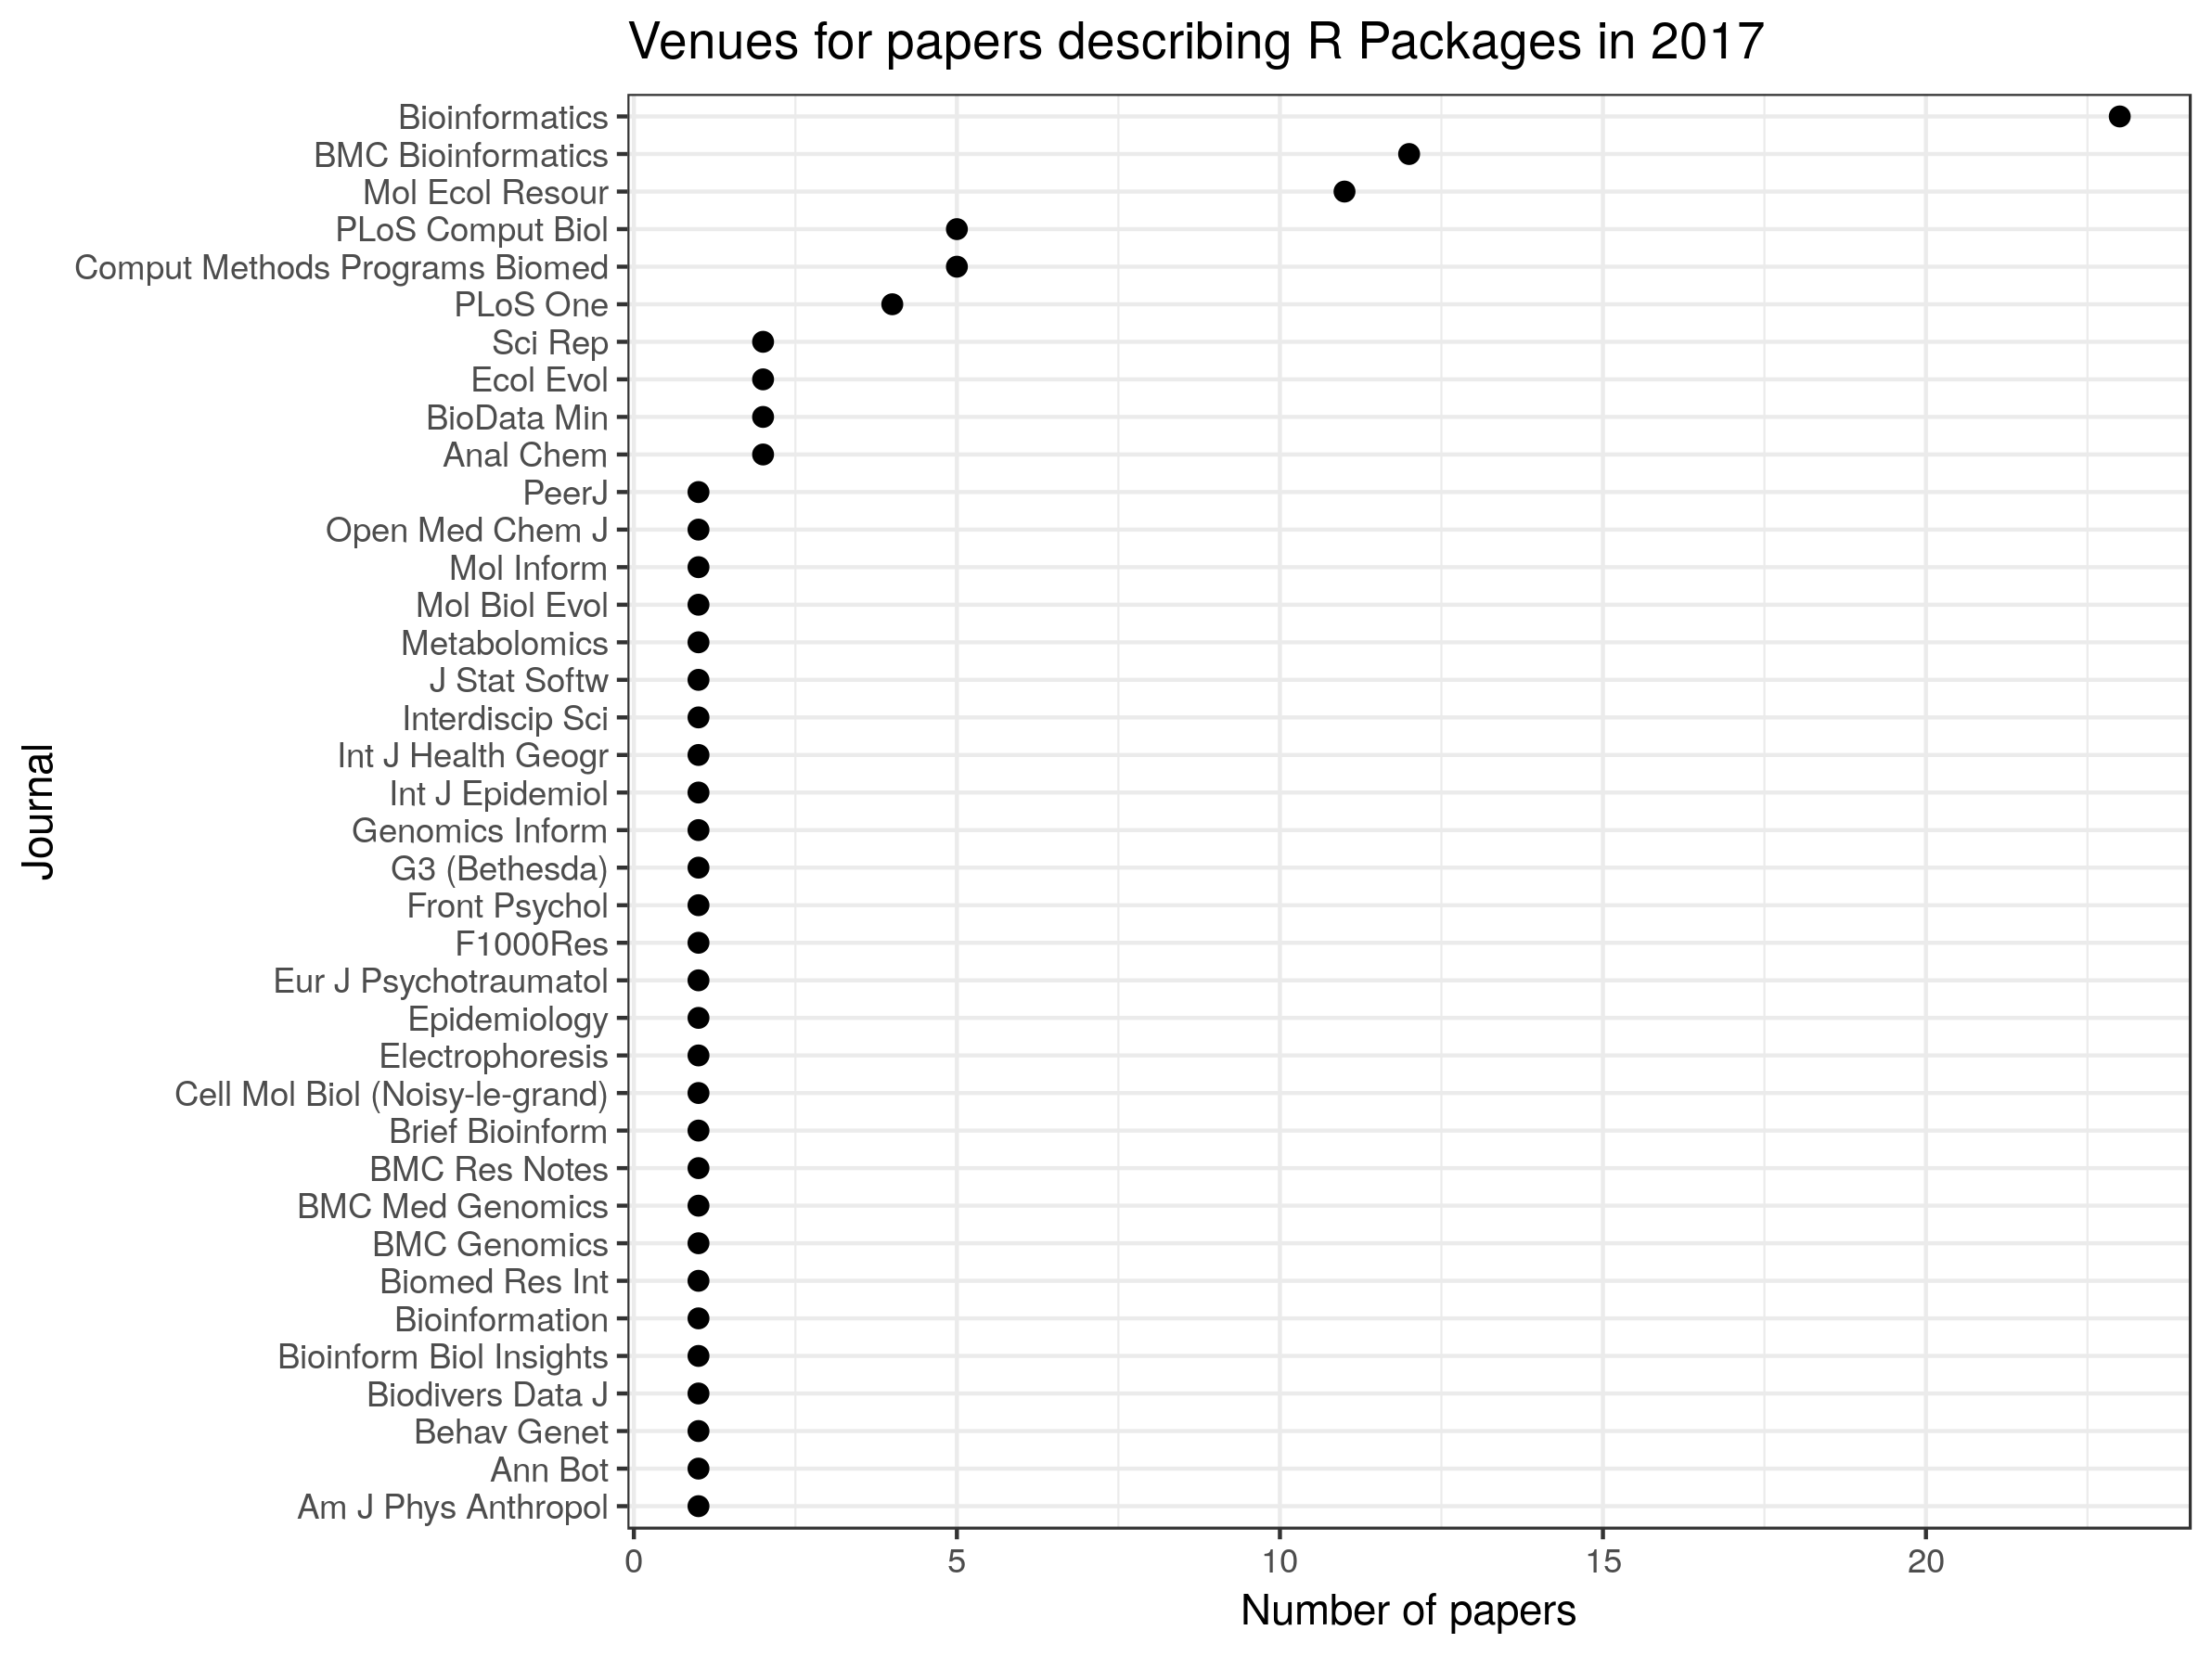 Dot plot: destination of papers describing R packages in 2017